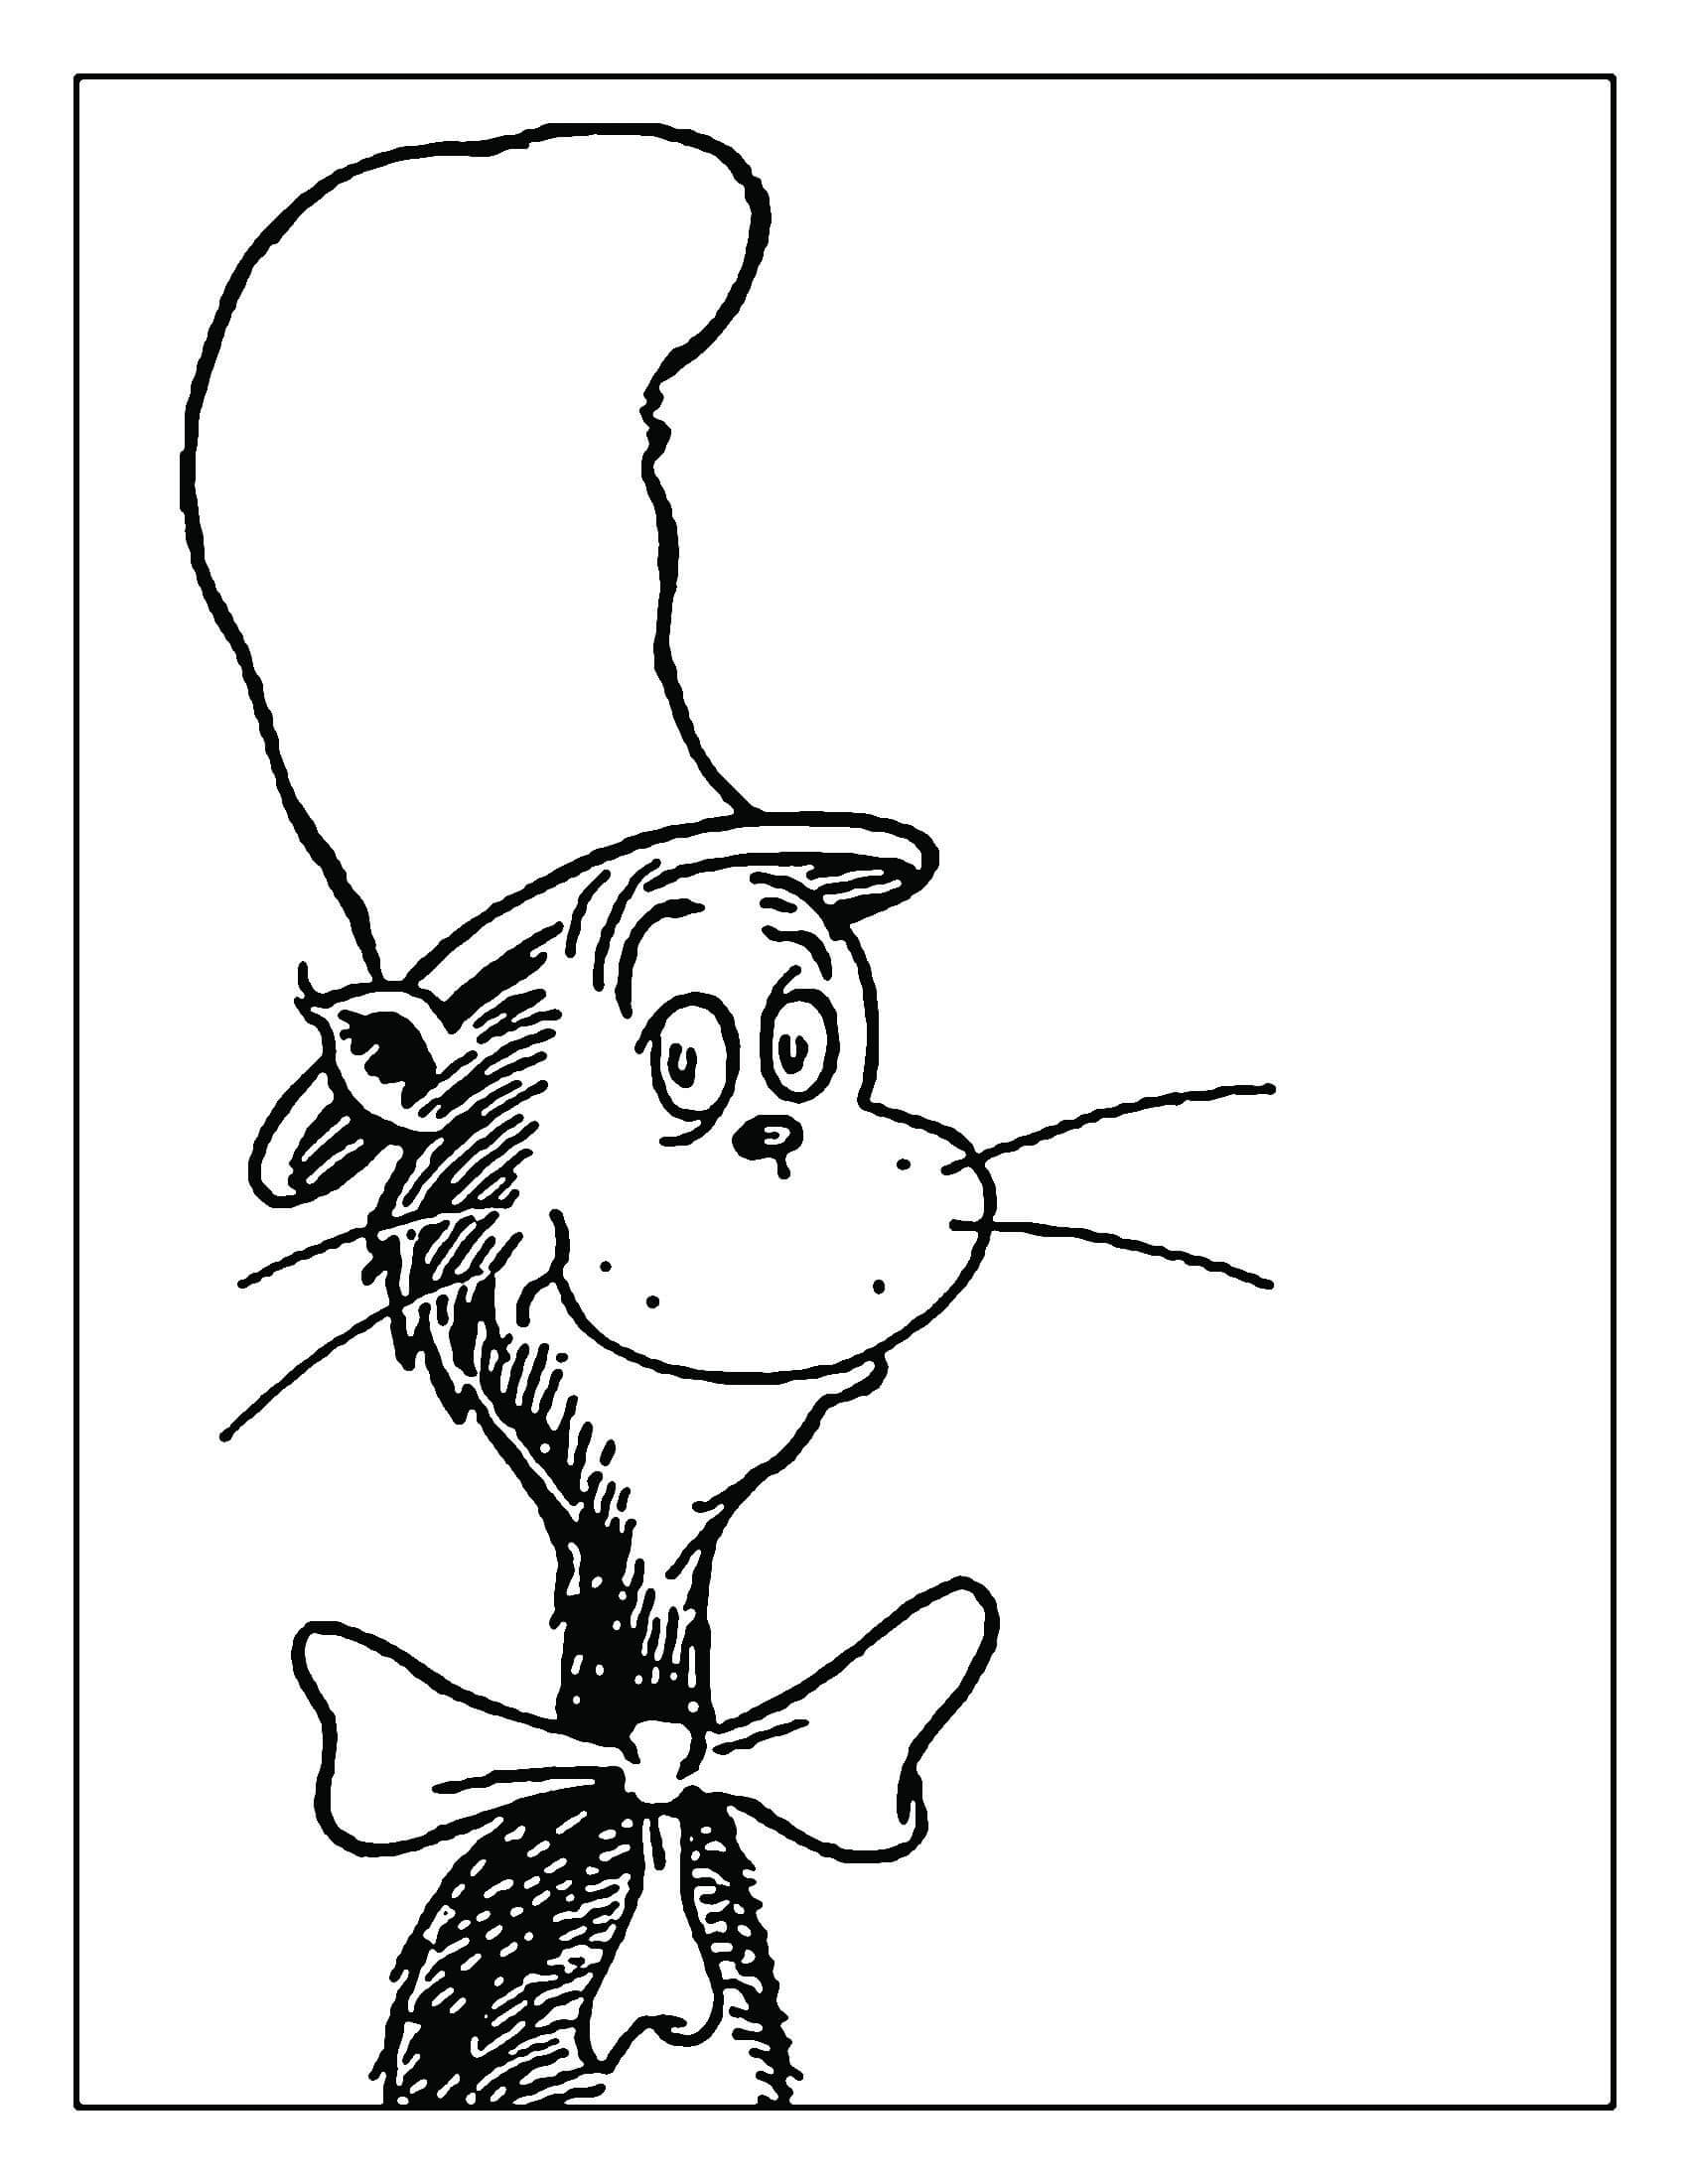 Free Cat In The Hat Images Black And White, Download Free Pertaining To Blank Cat In The Hat Template